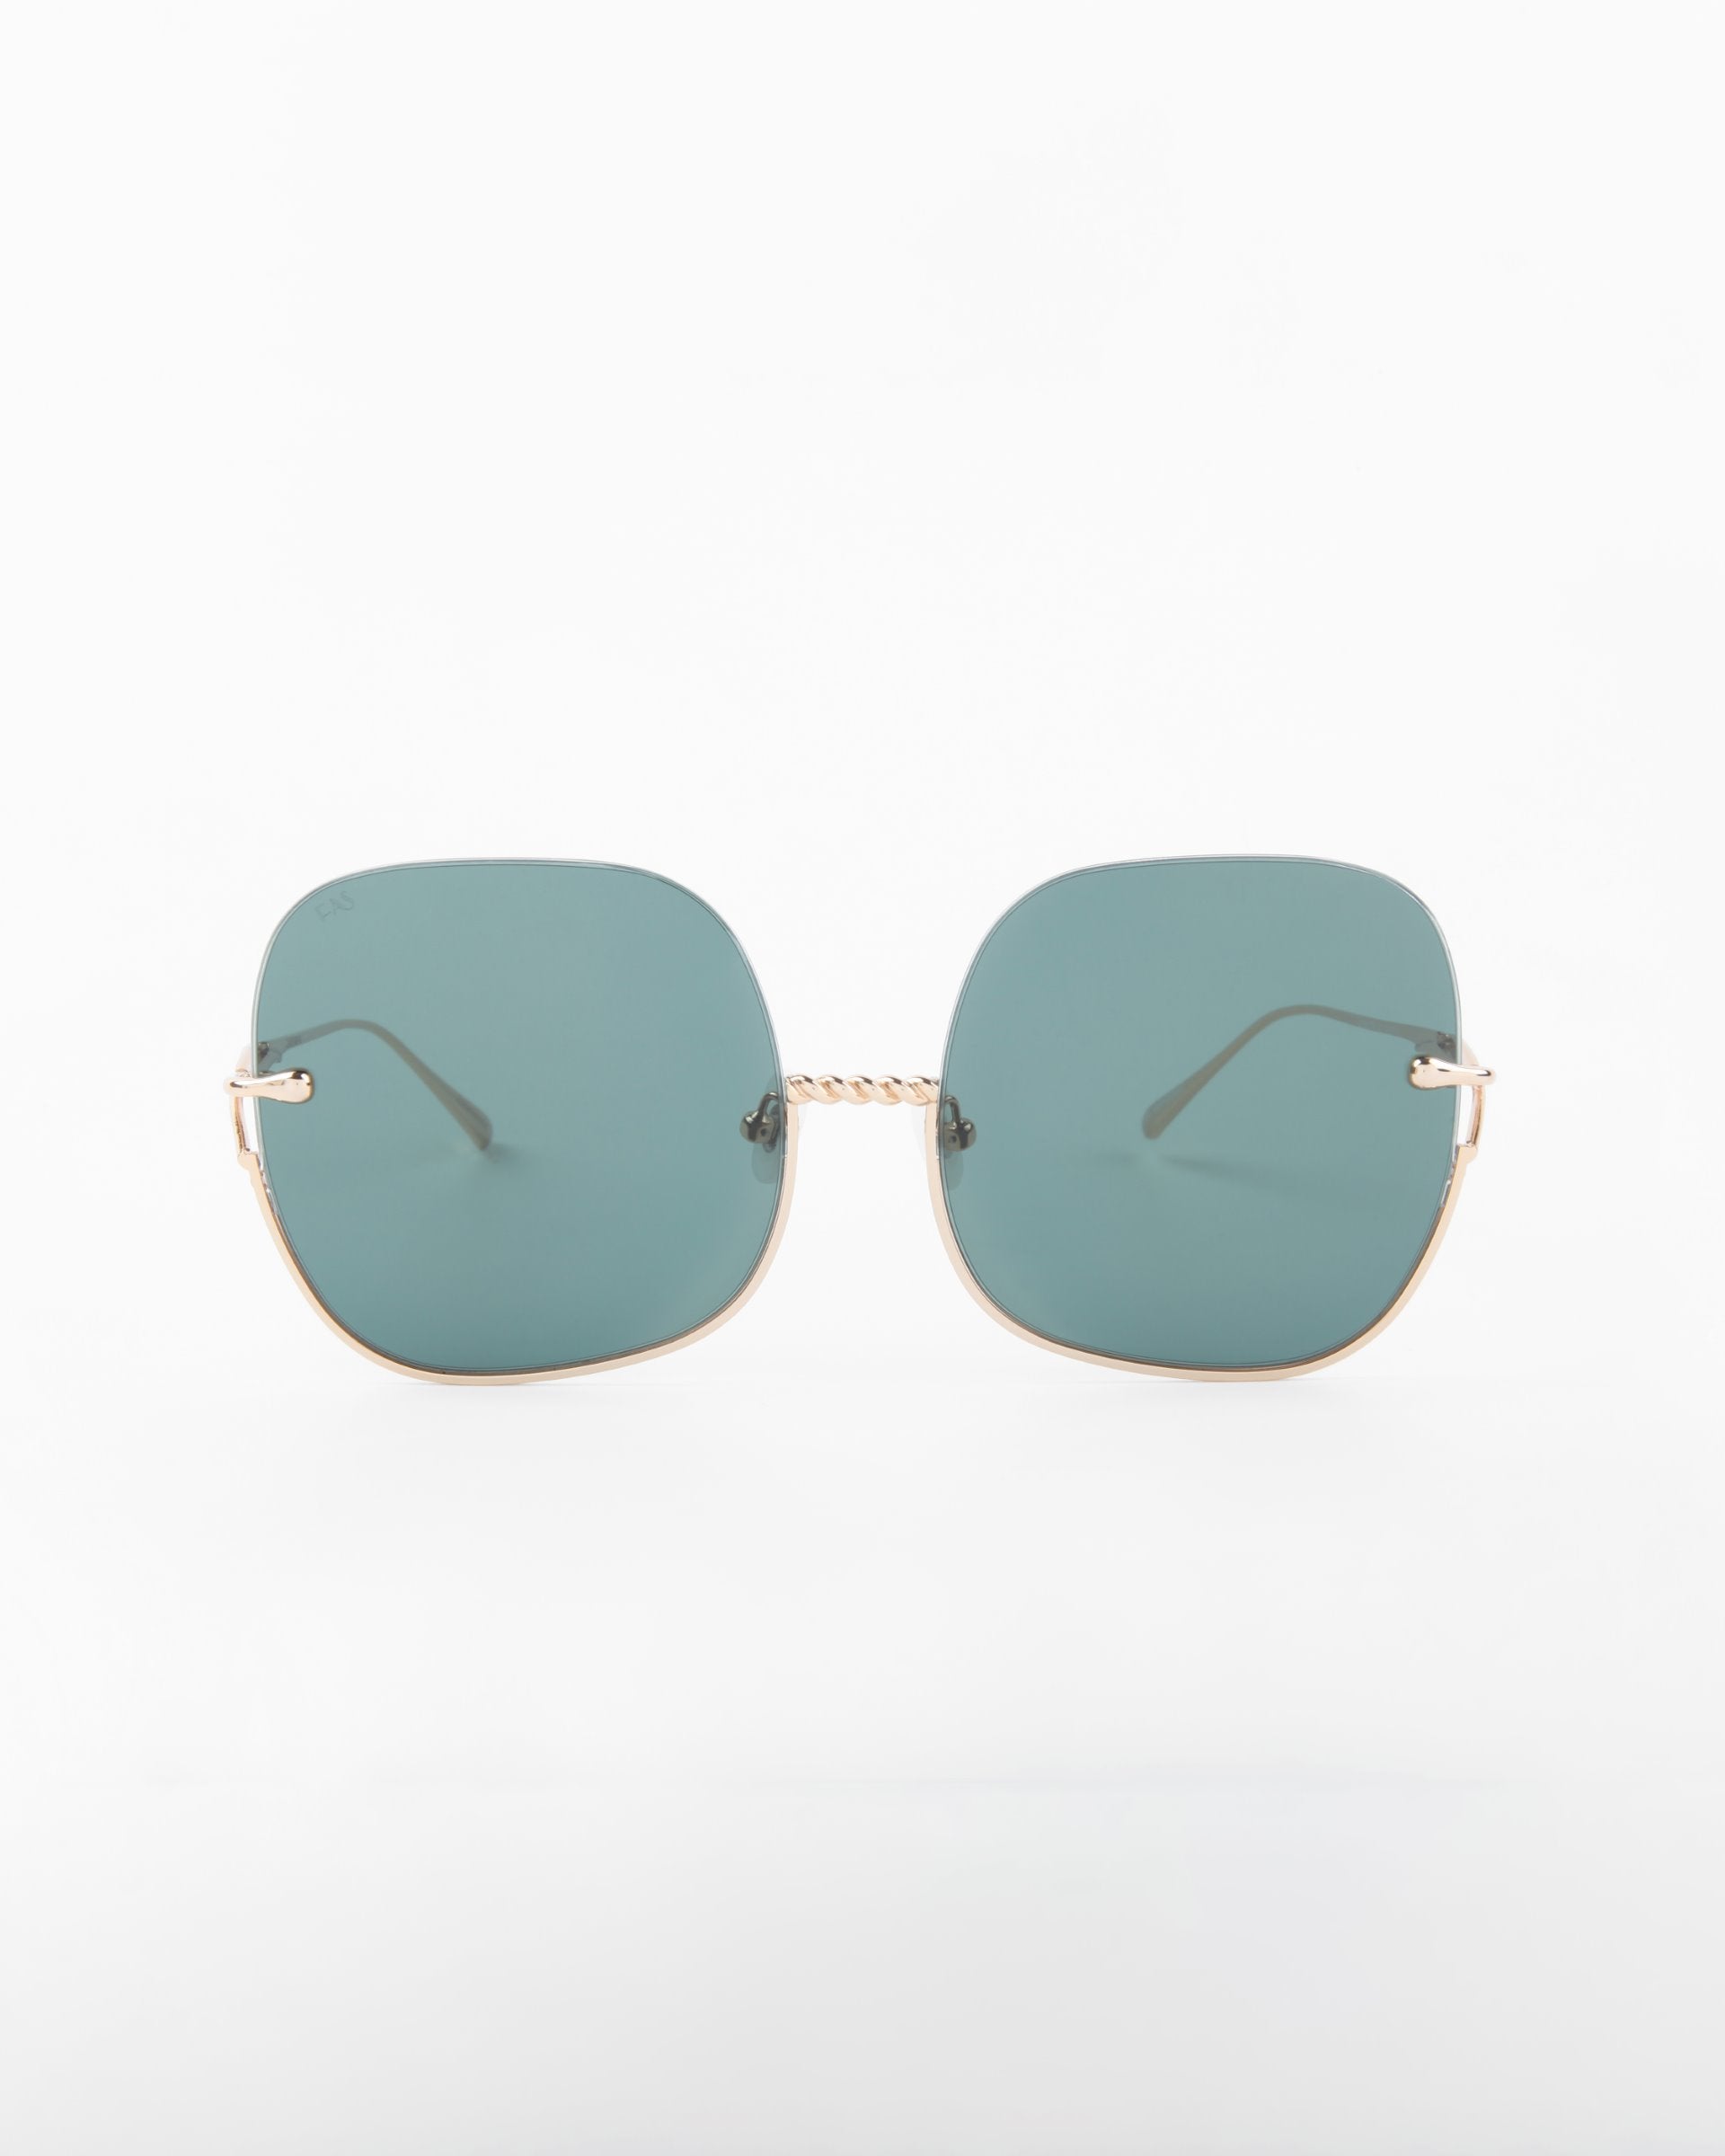 A pair of stylish Duchess sunglasses from For Art's Sake® with large, square-shaped, shatter-resistant lenses tinted in a cool blue color. The frame is minimalistic with thin, gold-colored arms and a delicate twisted bridge. With UVA & UVB protection, the handmade gold-plated frame stands out against the plain white background, emphasizing the design.